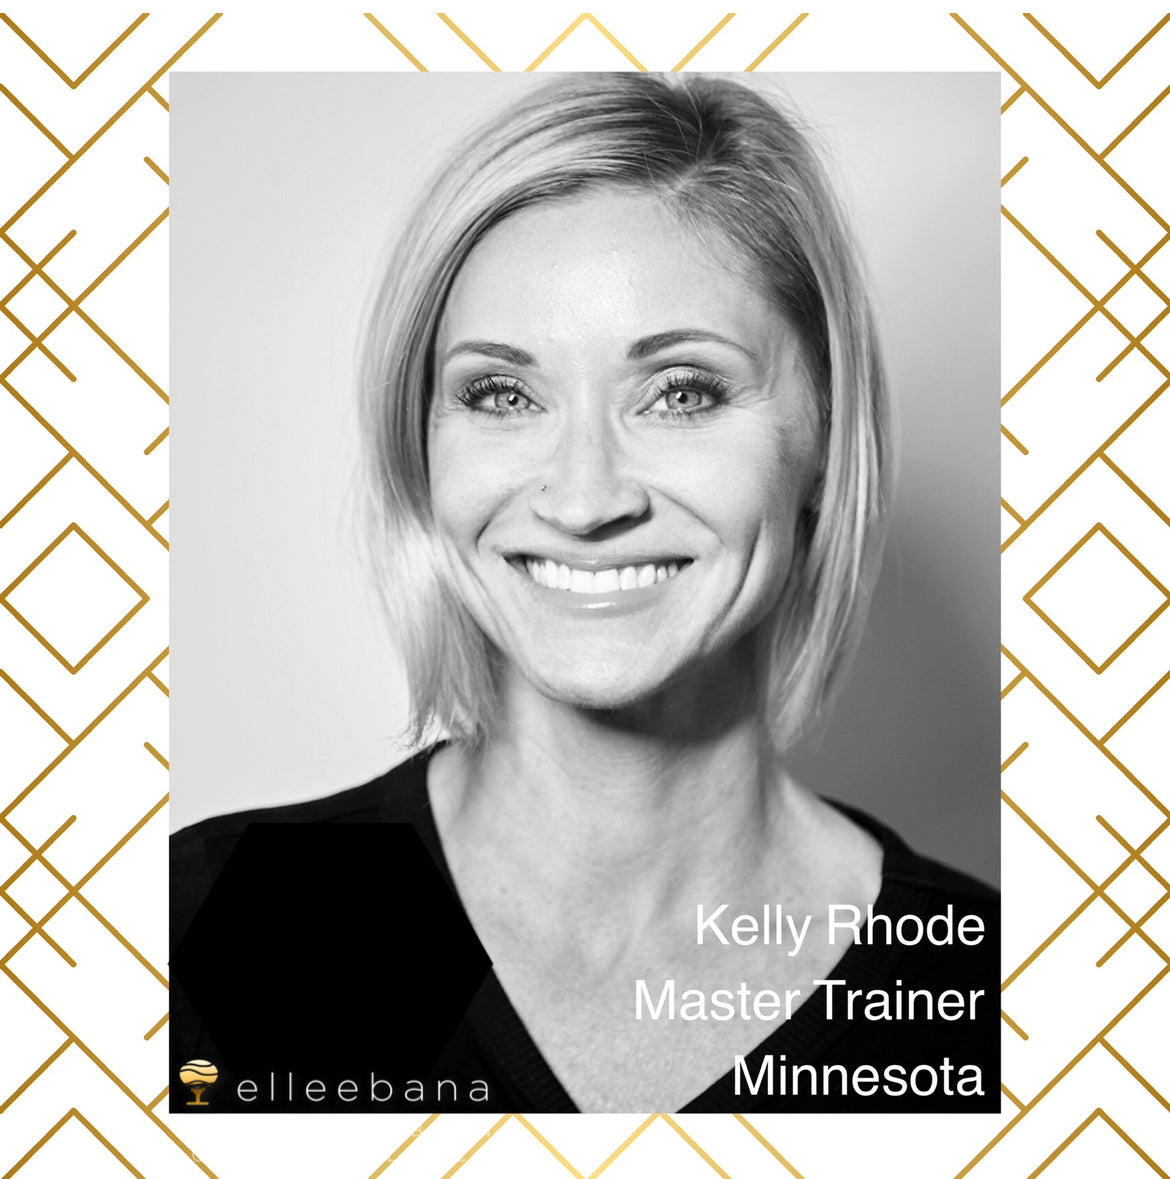 Meet the Panoply Beauty founder: Kelly Rhode